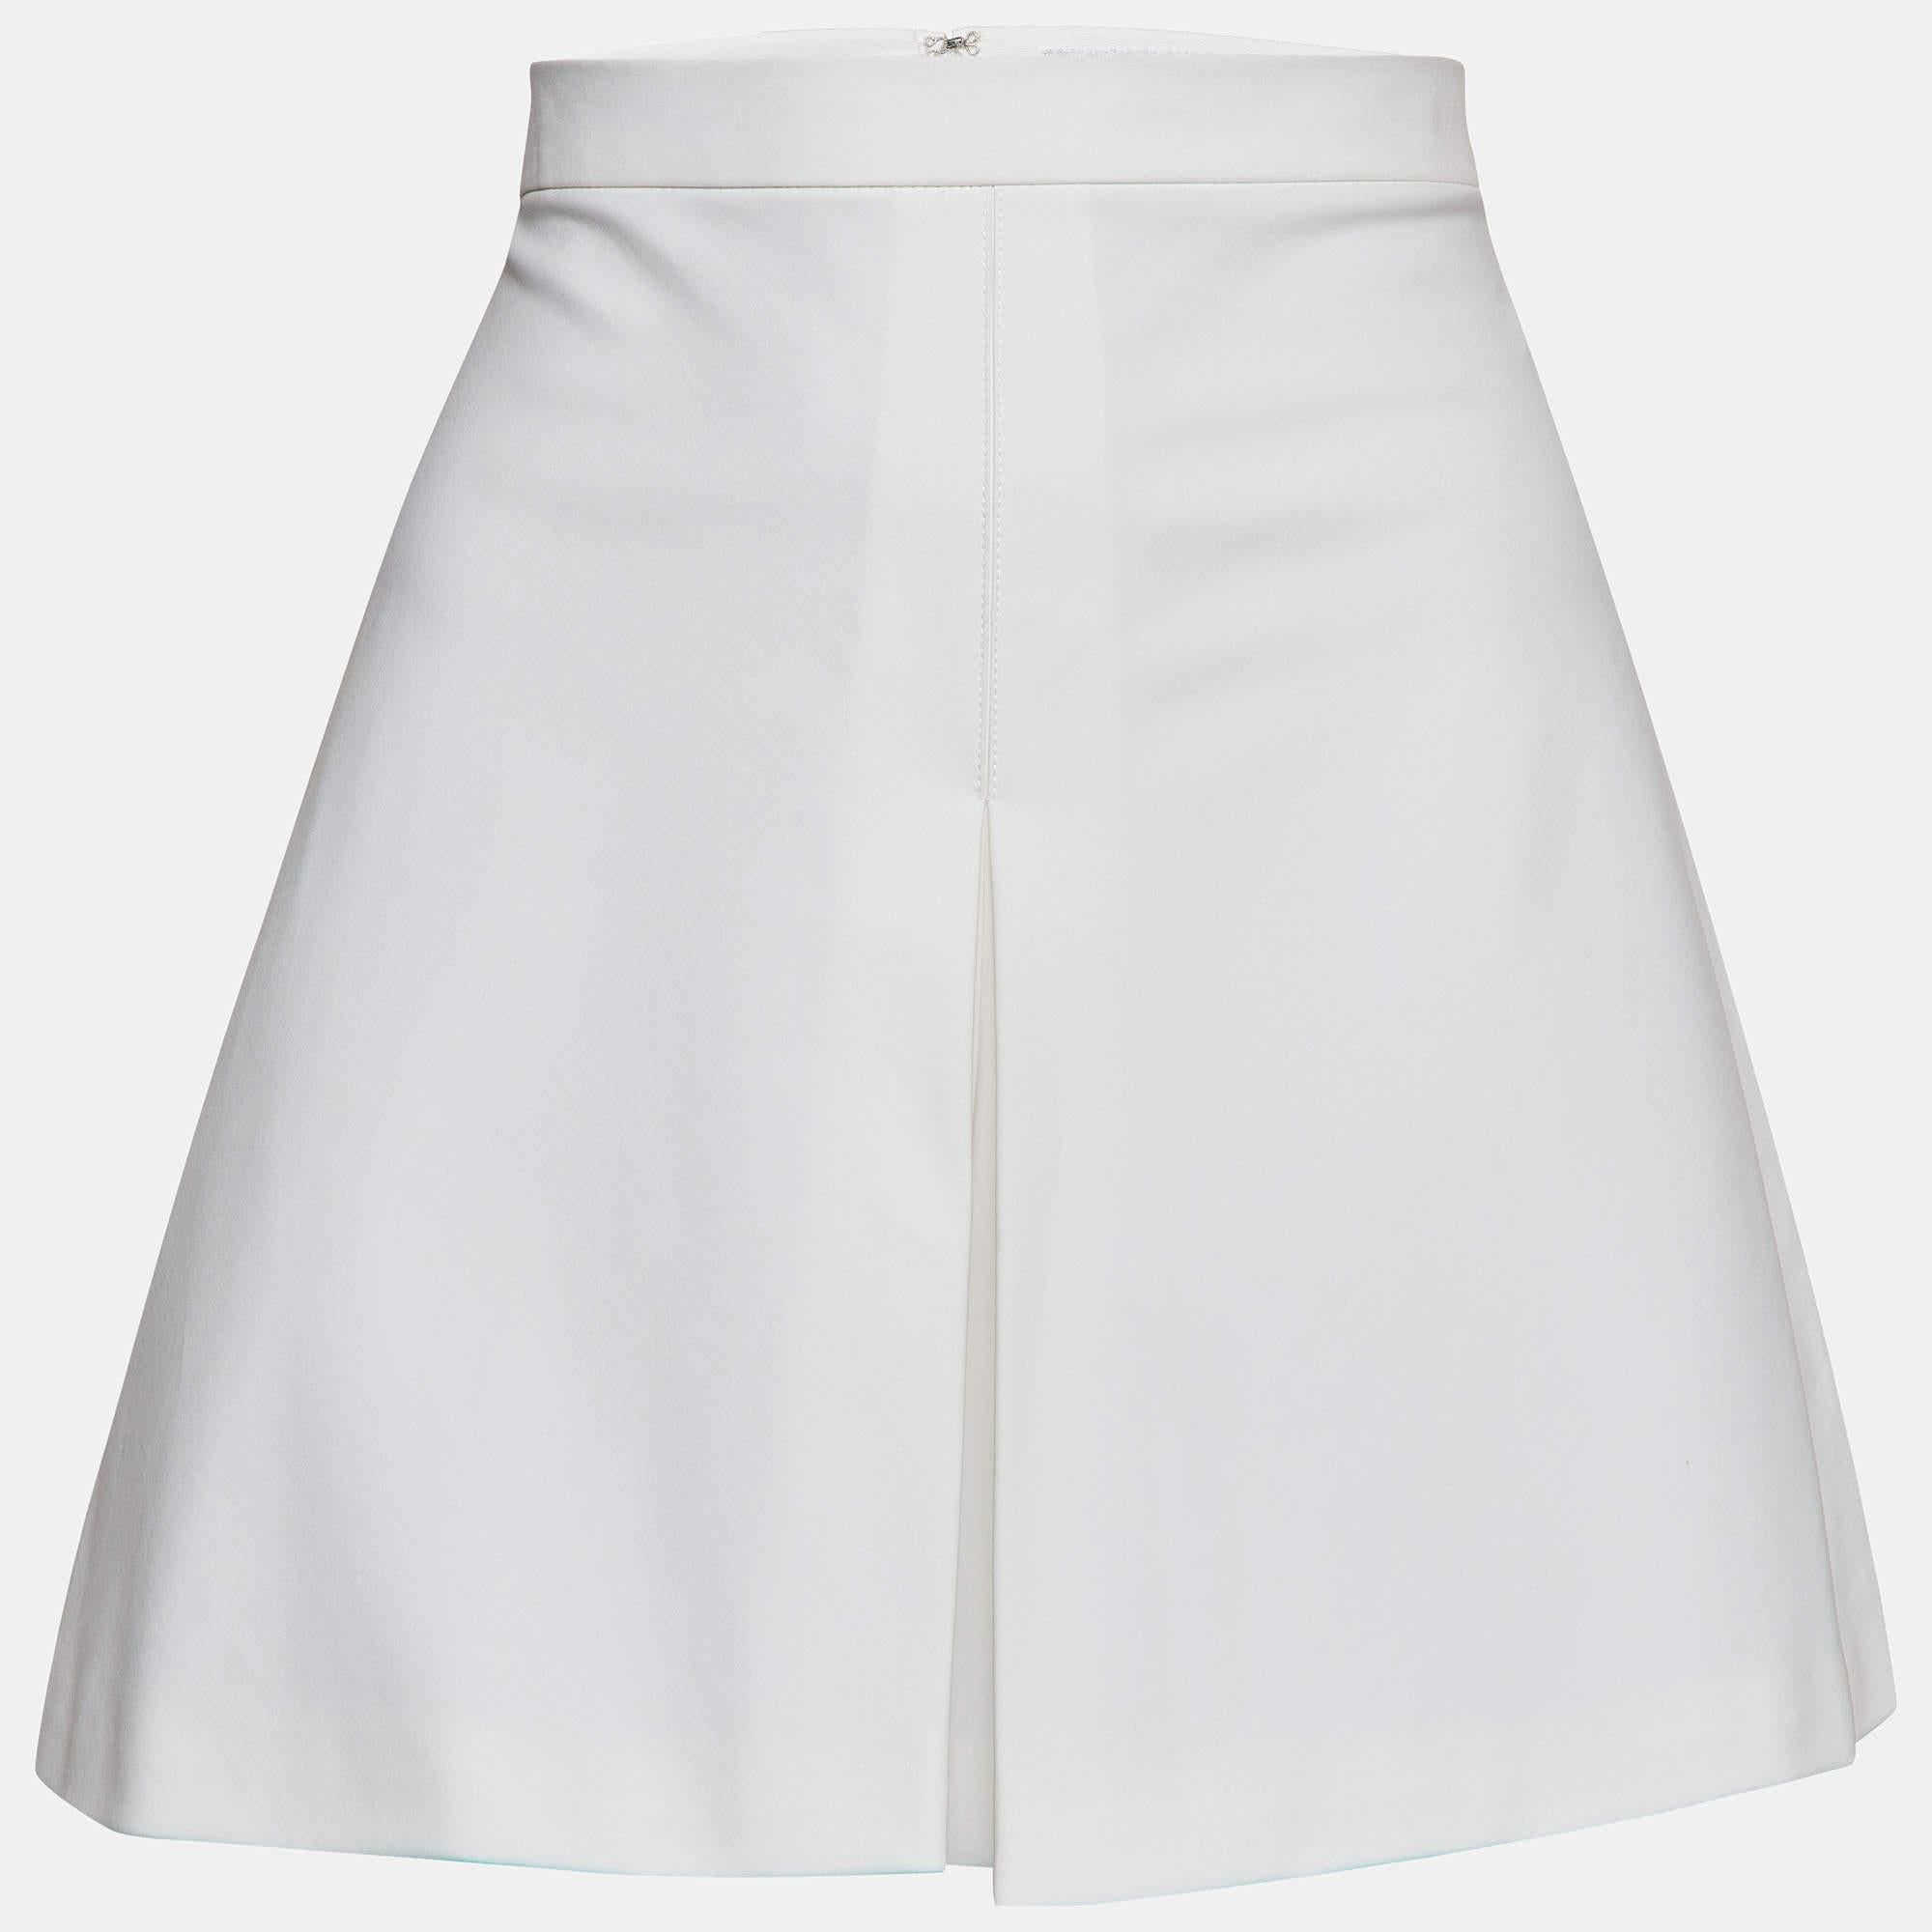 Crafted with precision and finesse, the Christian Dior skorts exude timeless charm. Merging the femininity of skirts with the practicality of shorts, these skorts boast delicate pleats that cascade gracefully. Their crisp white hue adds a refreshing